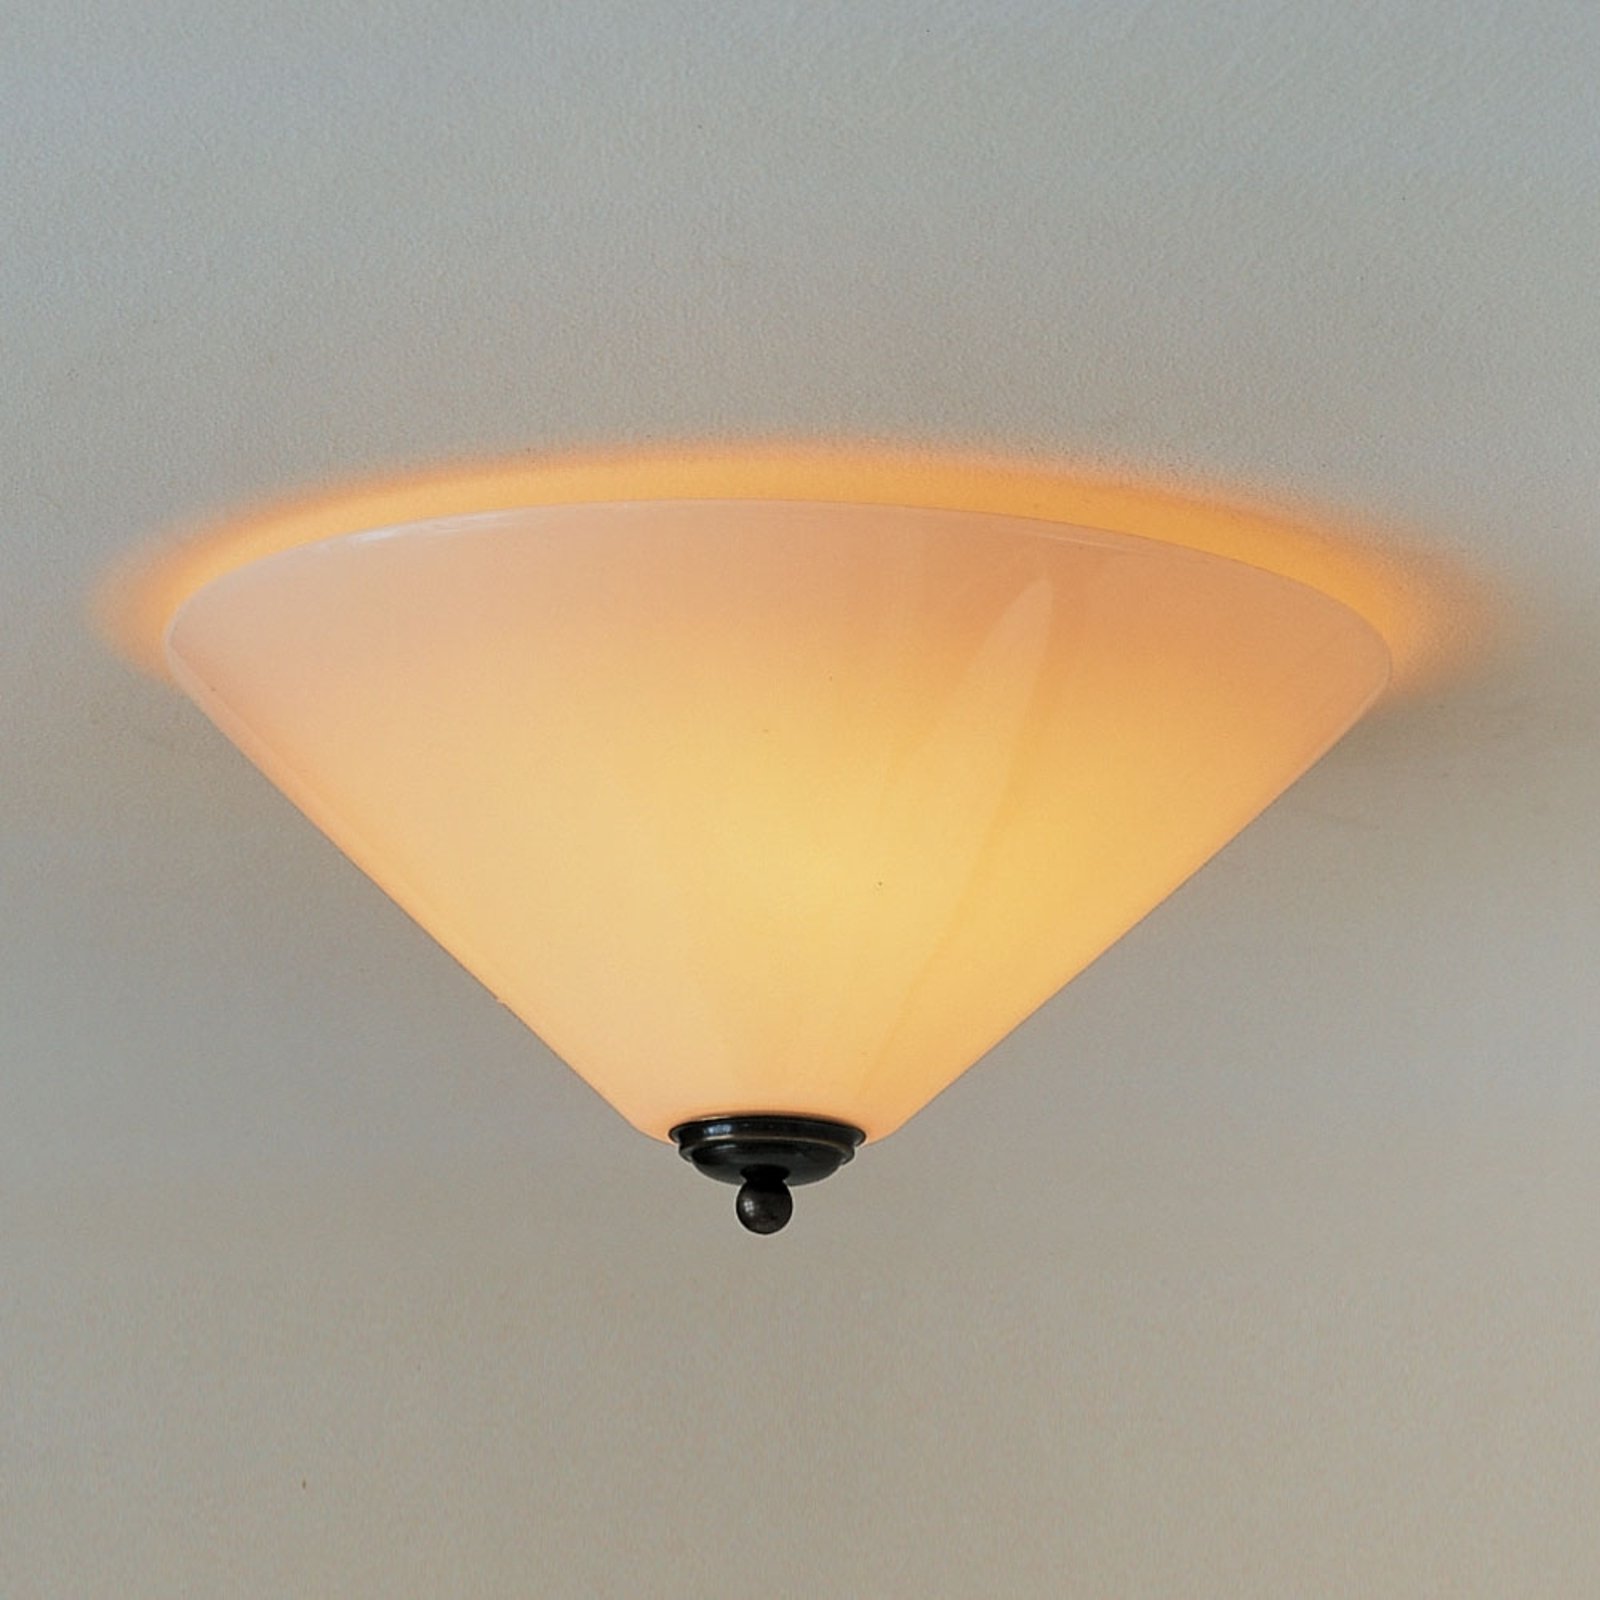 Classic YEAR 1900 ceiling light